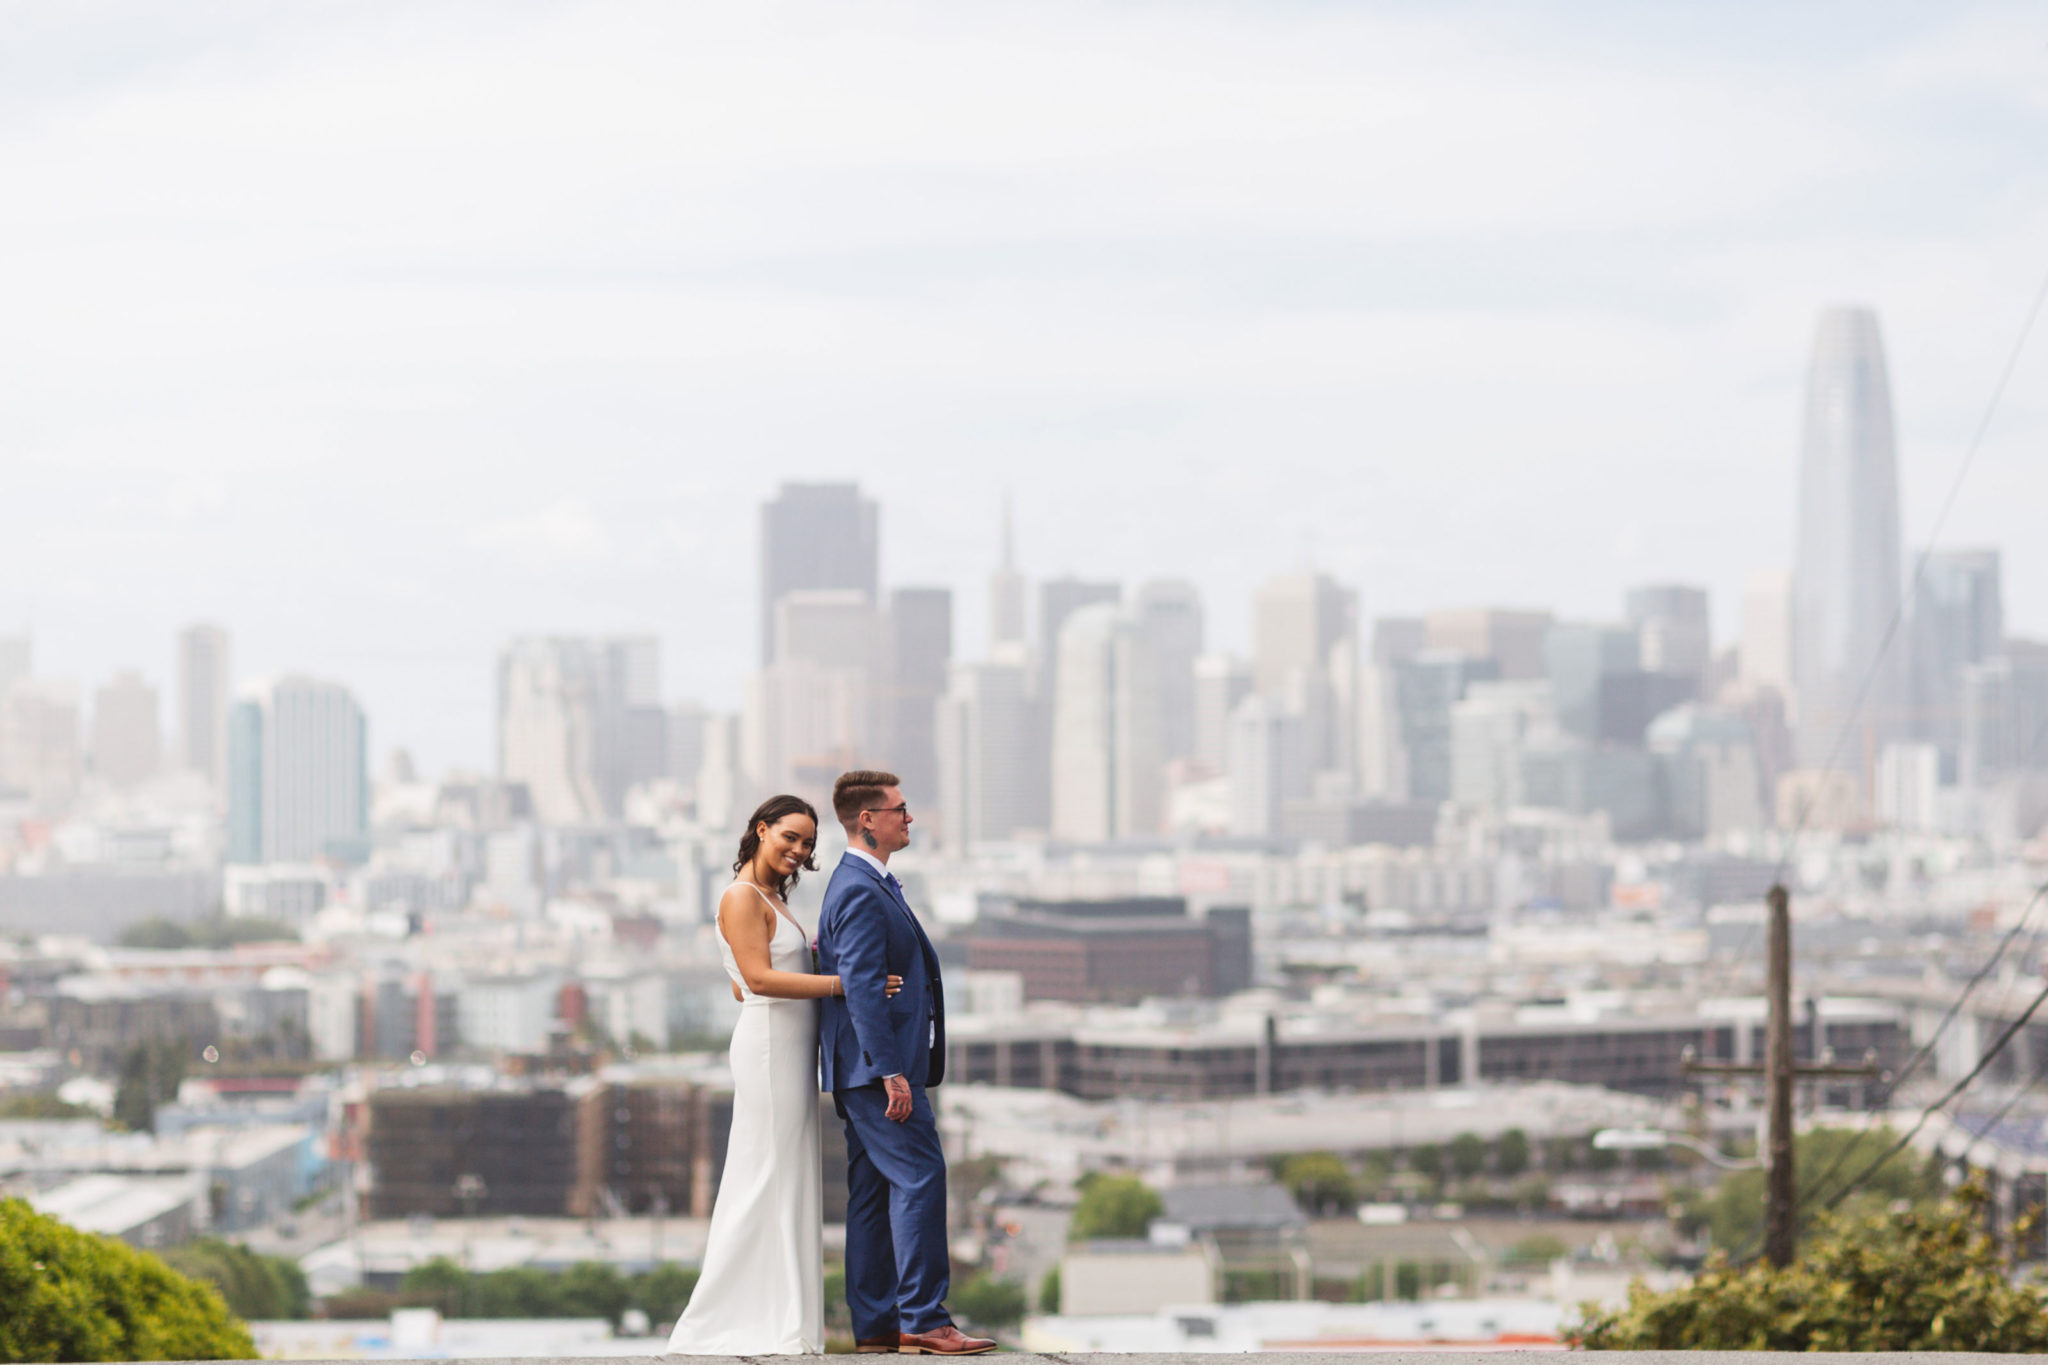 Bride and groom posing with san francisco skyline at Potrero Hill Wisconsin & 20th Streets after city hall wedding